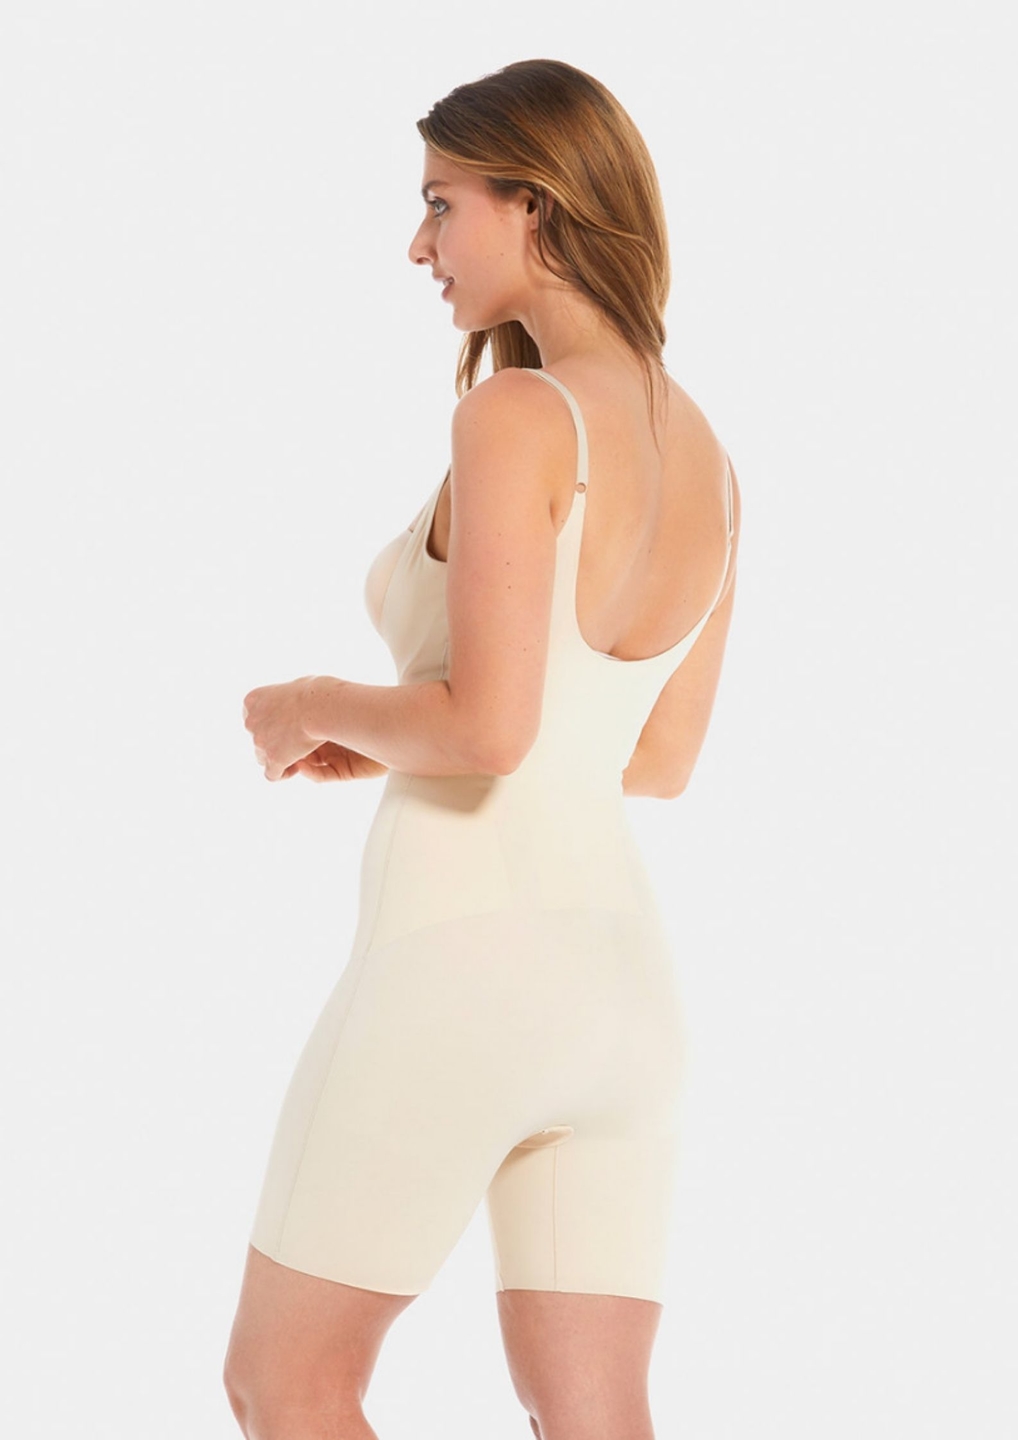 Can Wearing Shapewear Help You Lose Weight? Find Out The Truth Here! – The  Magic Knicker Shop